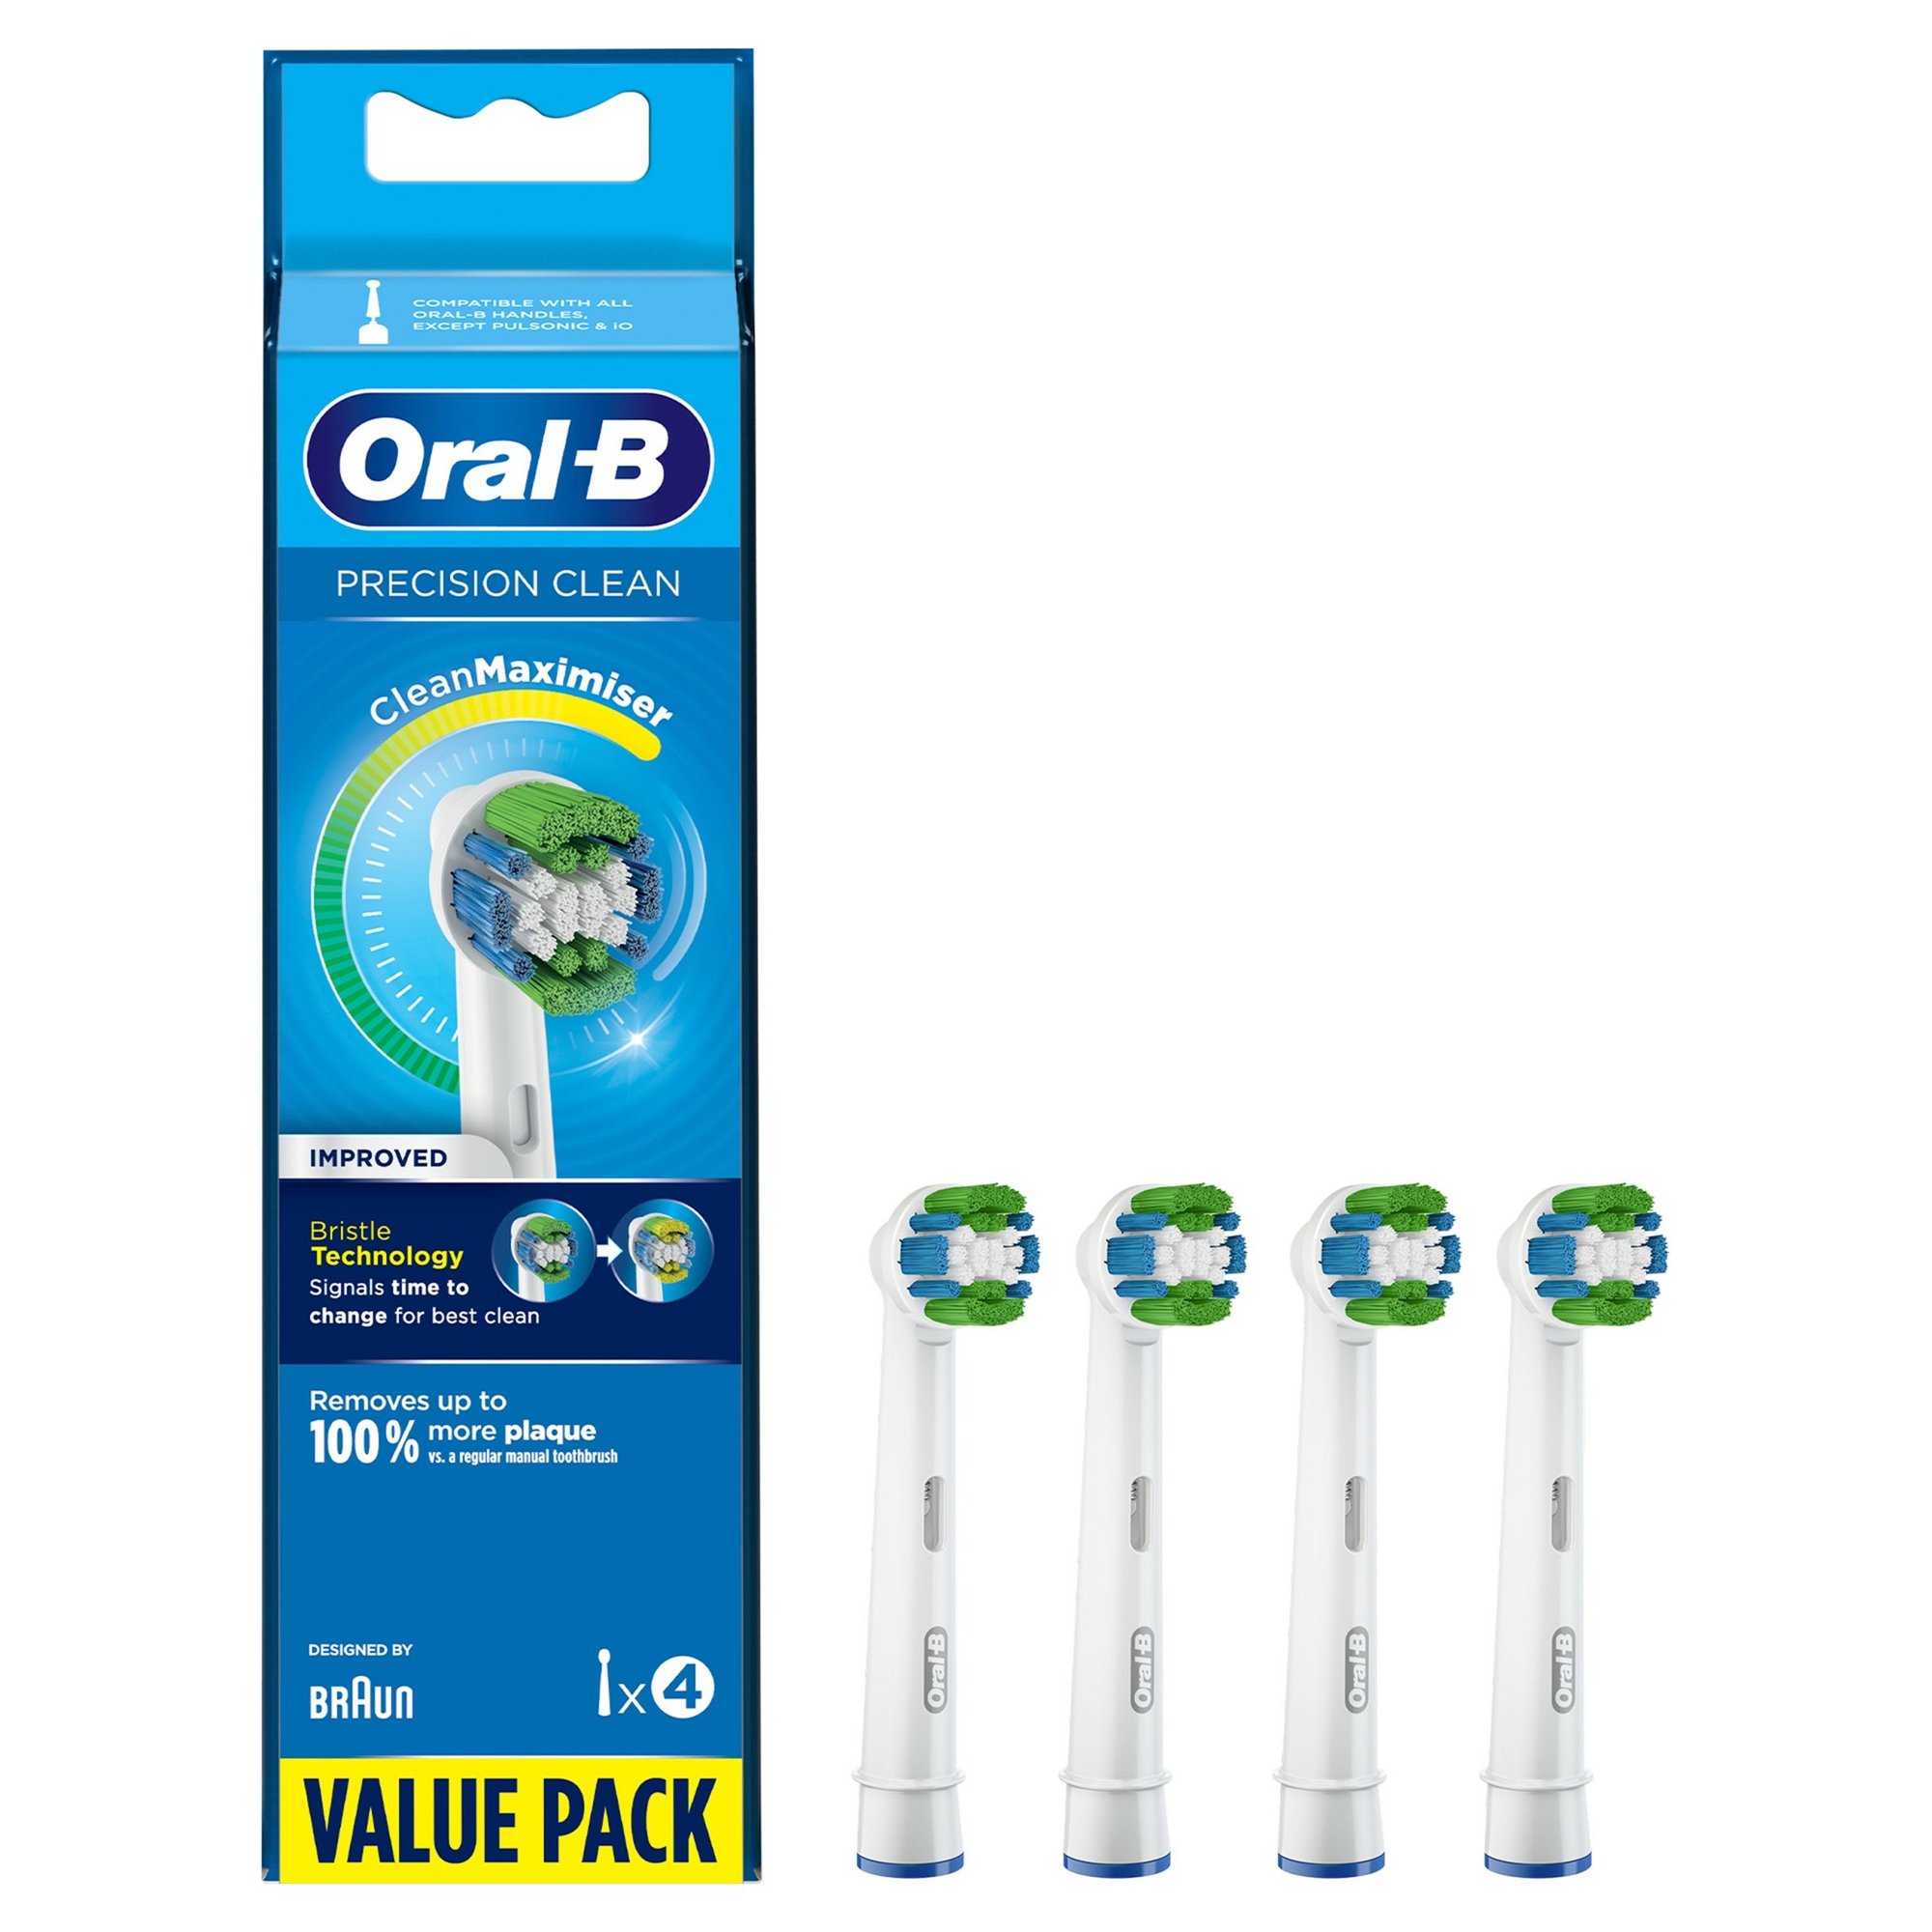 Oral B Pack of 4 Precision Clean-Clean Maximiser Toothbrush Heads